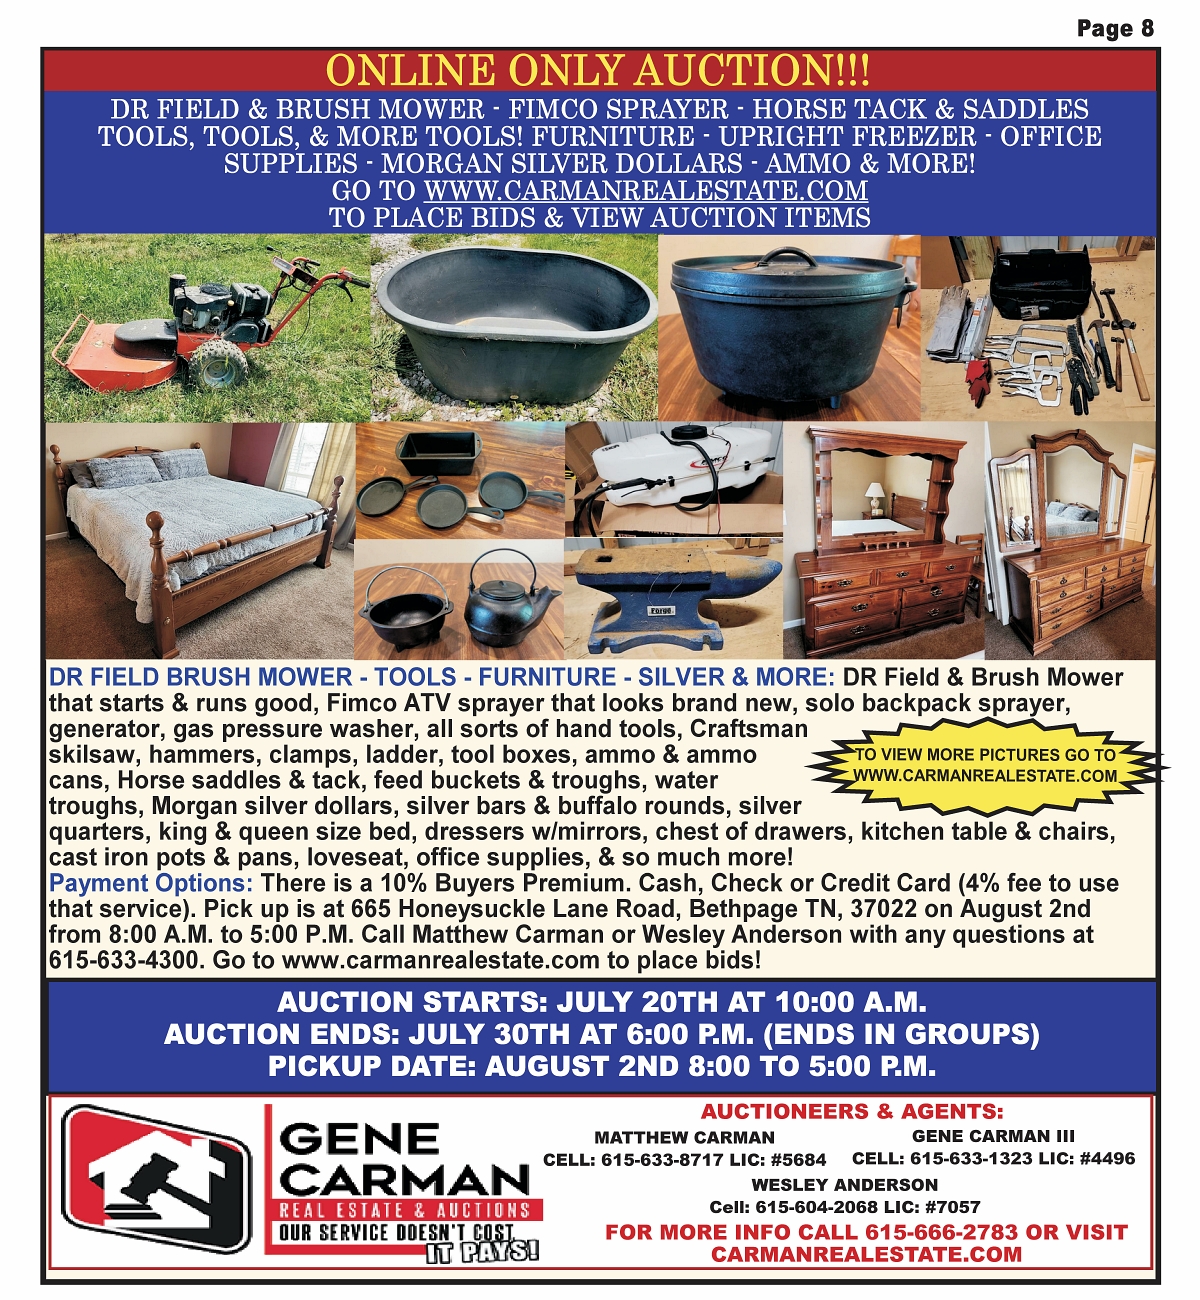 DR FIELD & BRUSH MOWER - SPRAYERS - HORSE TACK & SADDLES - TOOLS, TOOLS, & MORE TOOLS! FURNITURE - UPRIGHT FREEZER - OFFICE SUPPLIES - SILVER - AMMO & MORE!